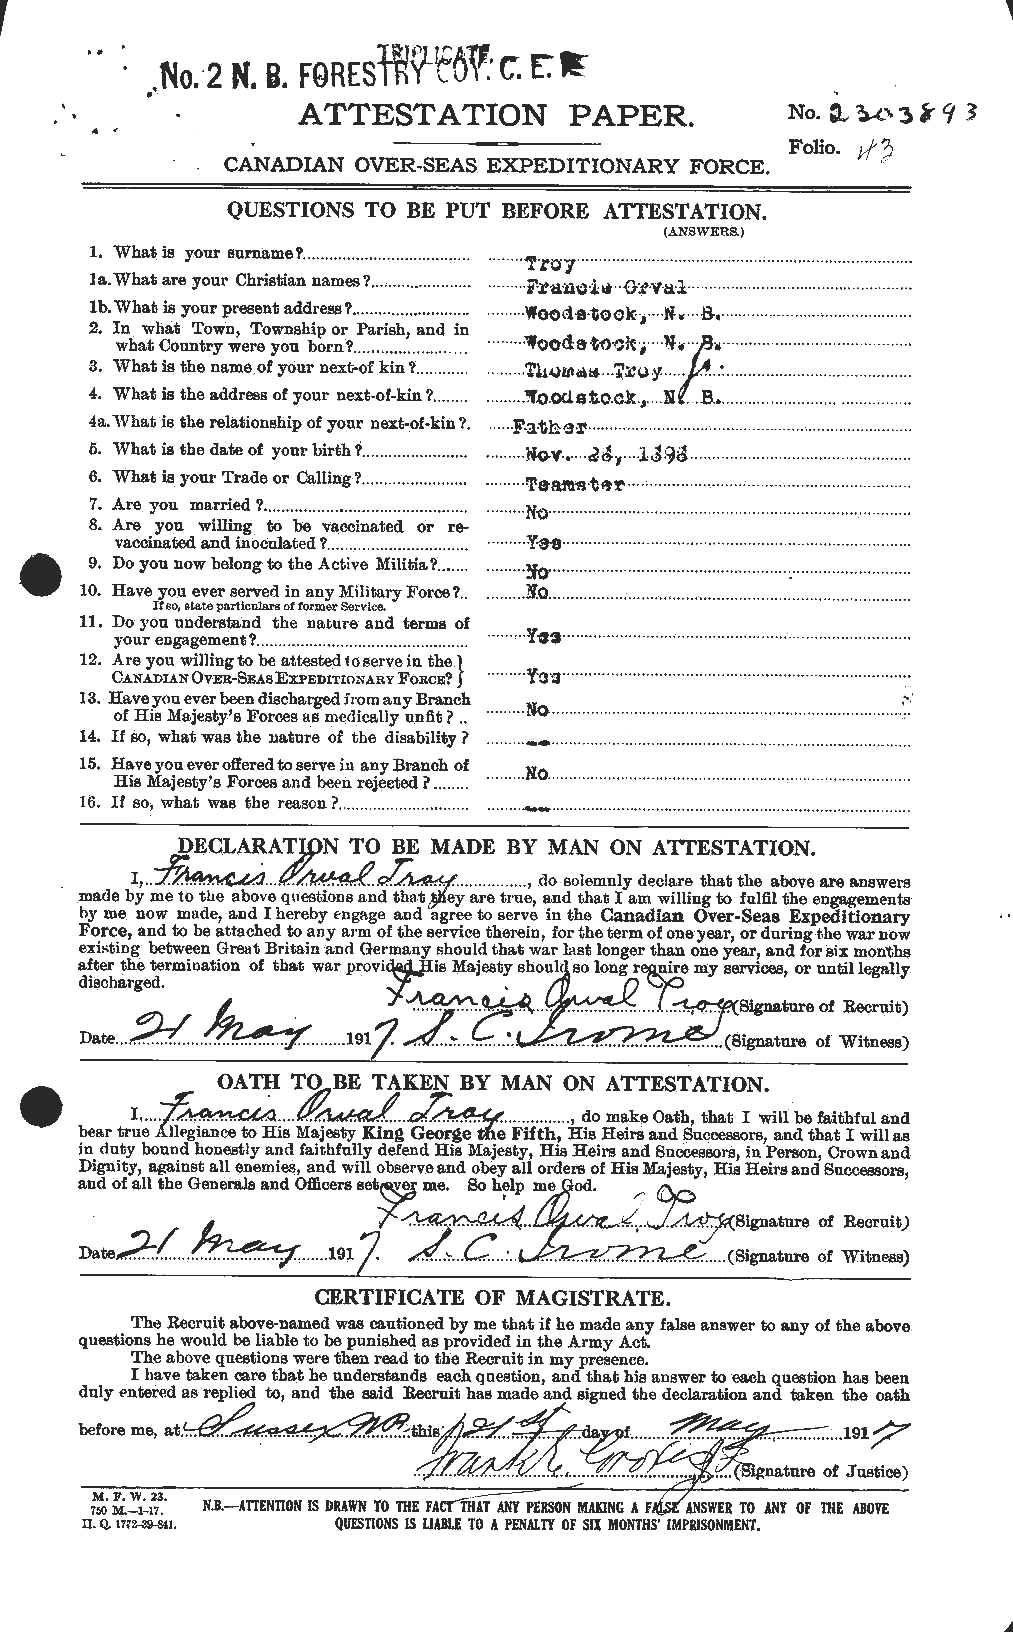 Personnel Records of the First World War - CEF 641851a